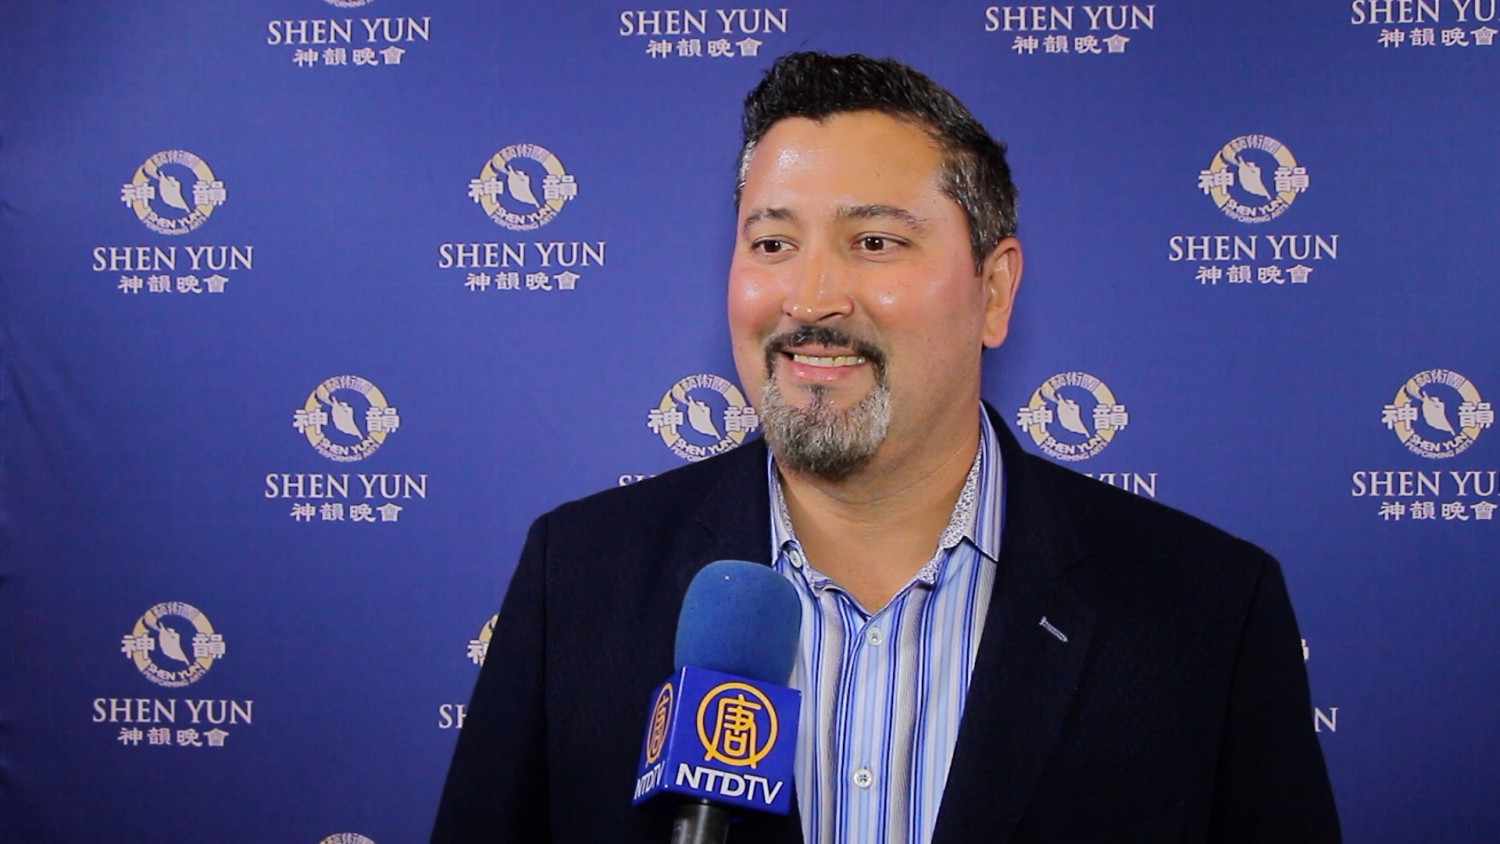 Orlando Audience Admires Shen Yun’s Efforts to Bring Back The Traditional Values